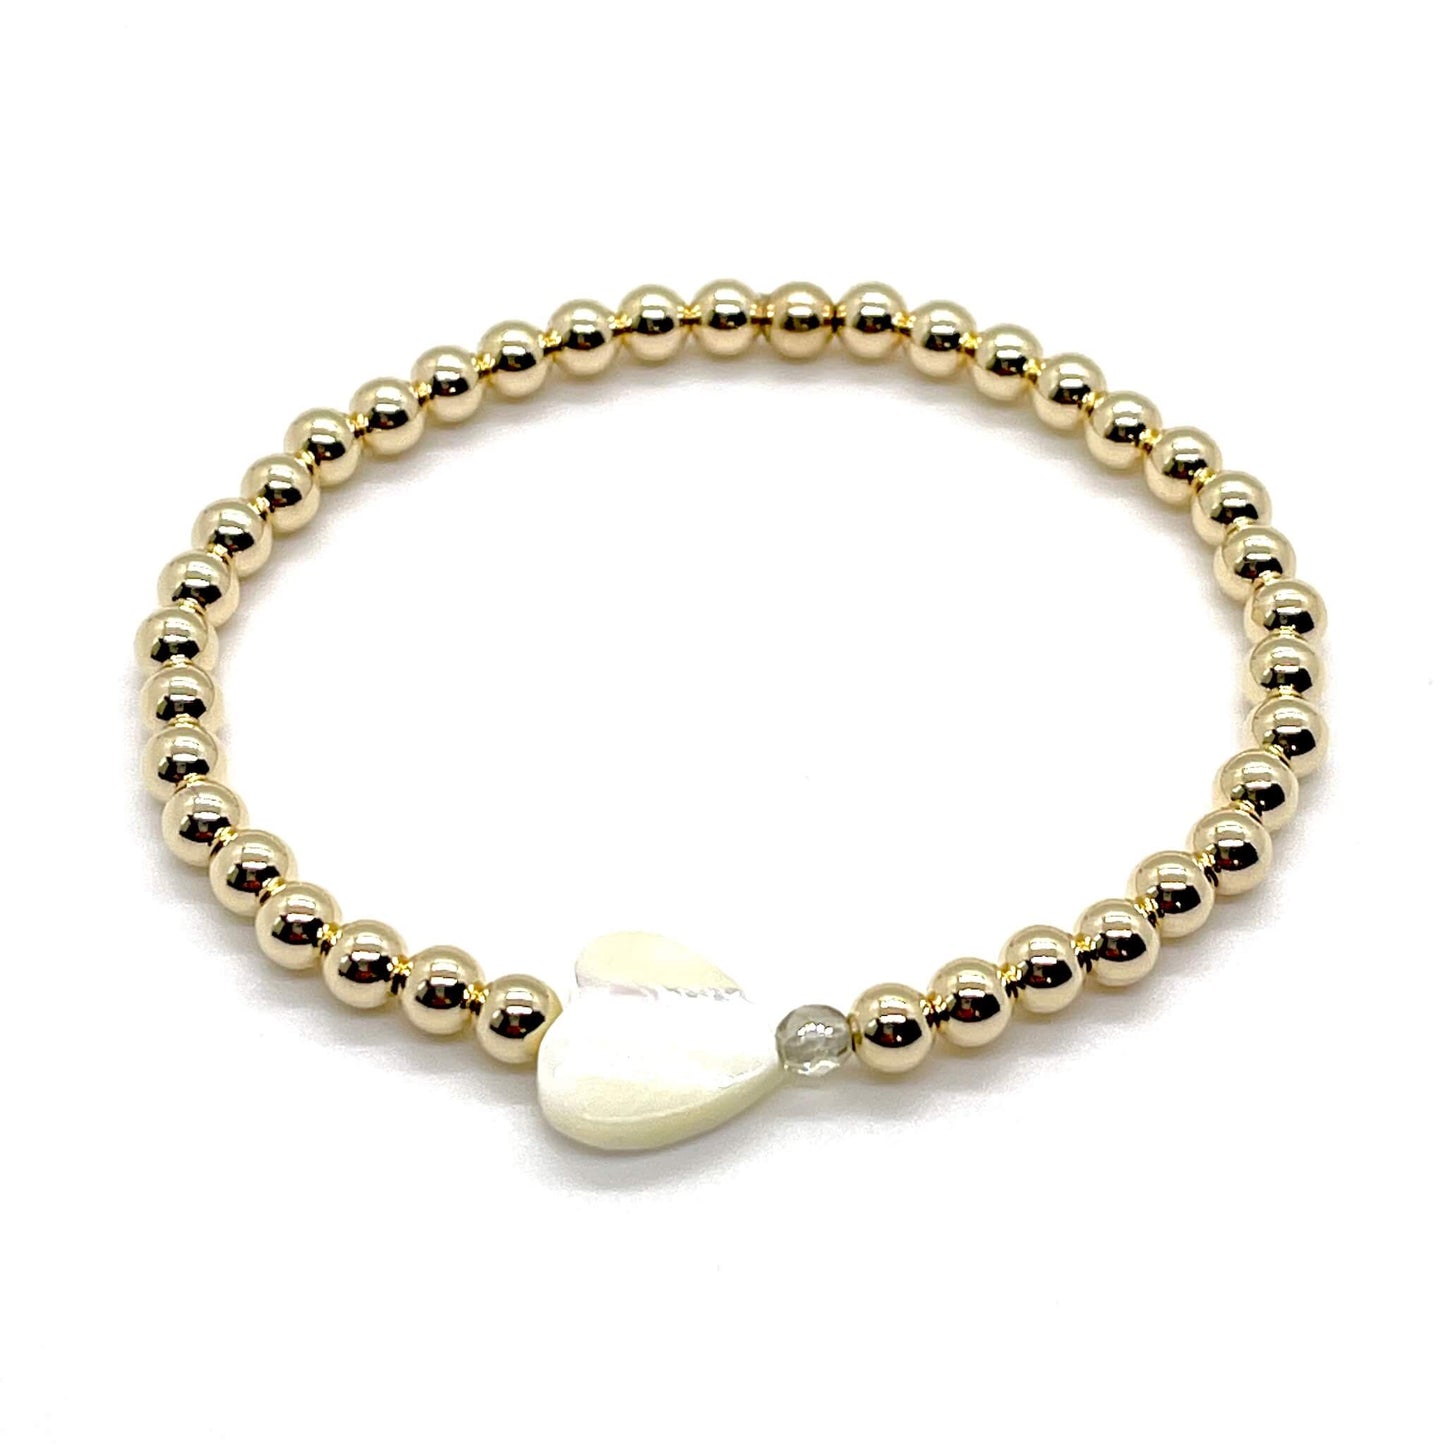 Gold heart bracelet with a mother-of-pearl heart, a small faceted grey-taupe crystal, and 4mm 14K gold filled beads.